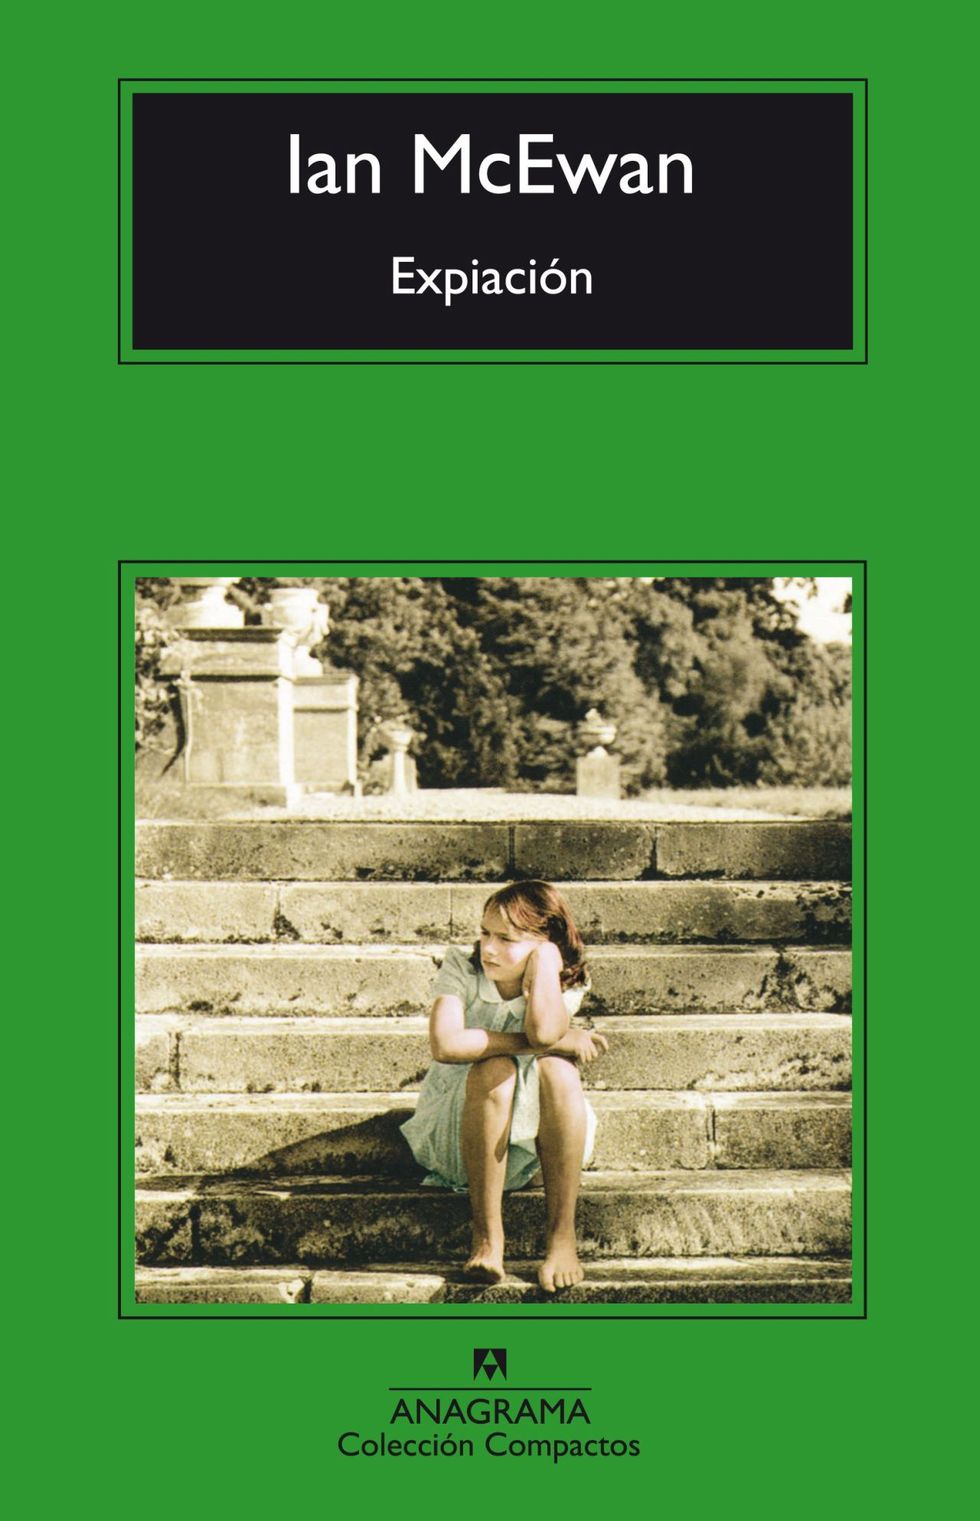 Green, Text, Photography, Rectangle, Poster, Stairs, History, Photo caption, Stock photography, Publication, 